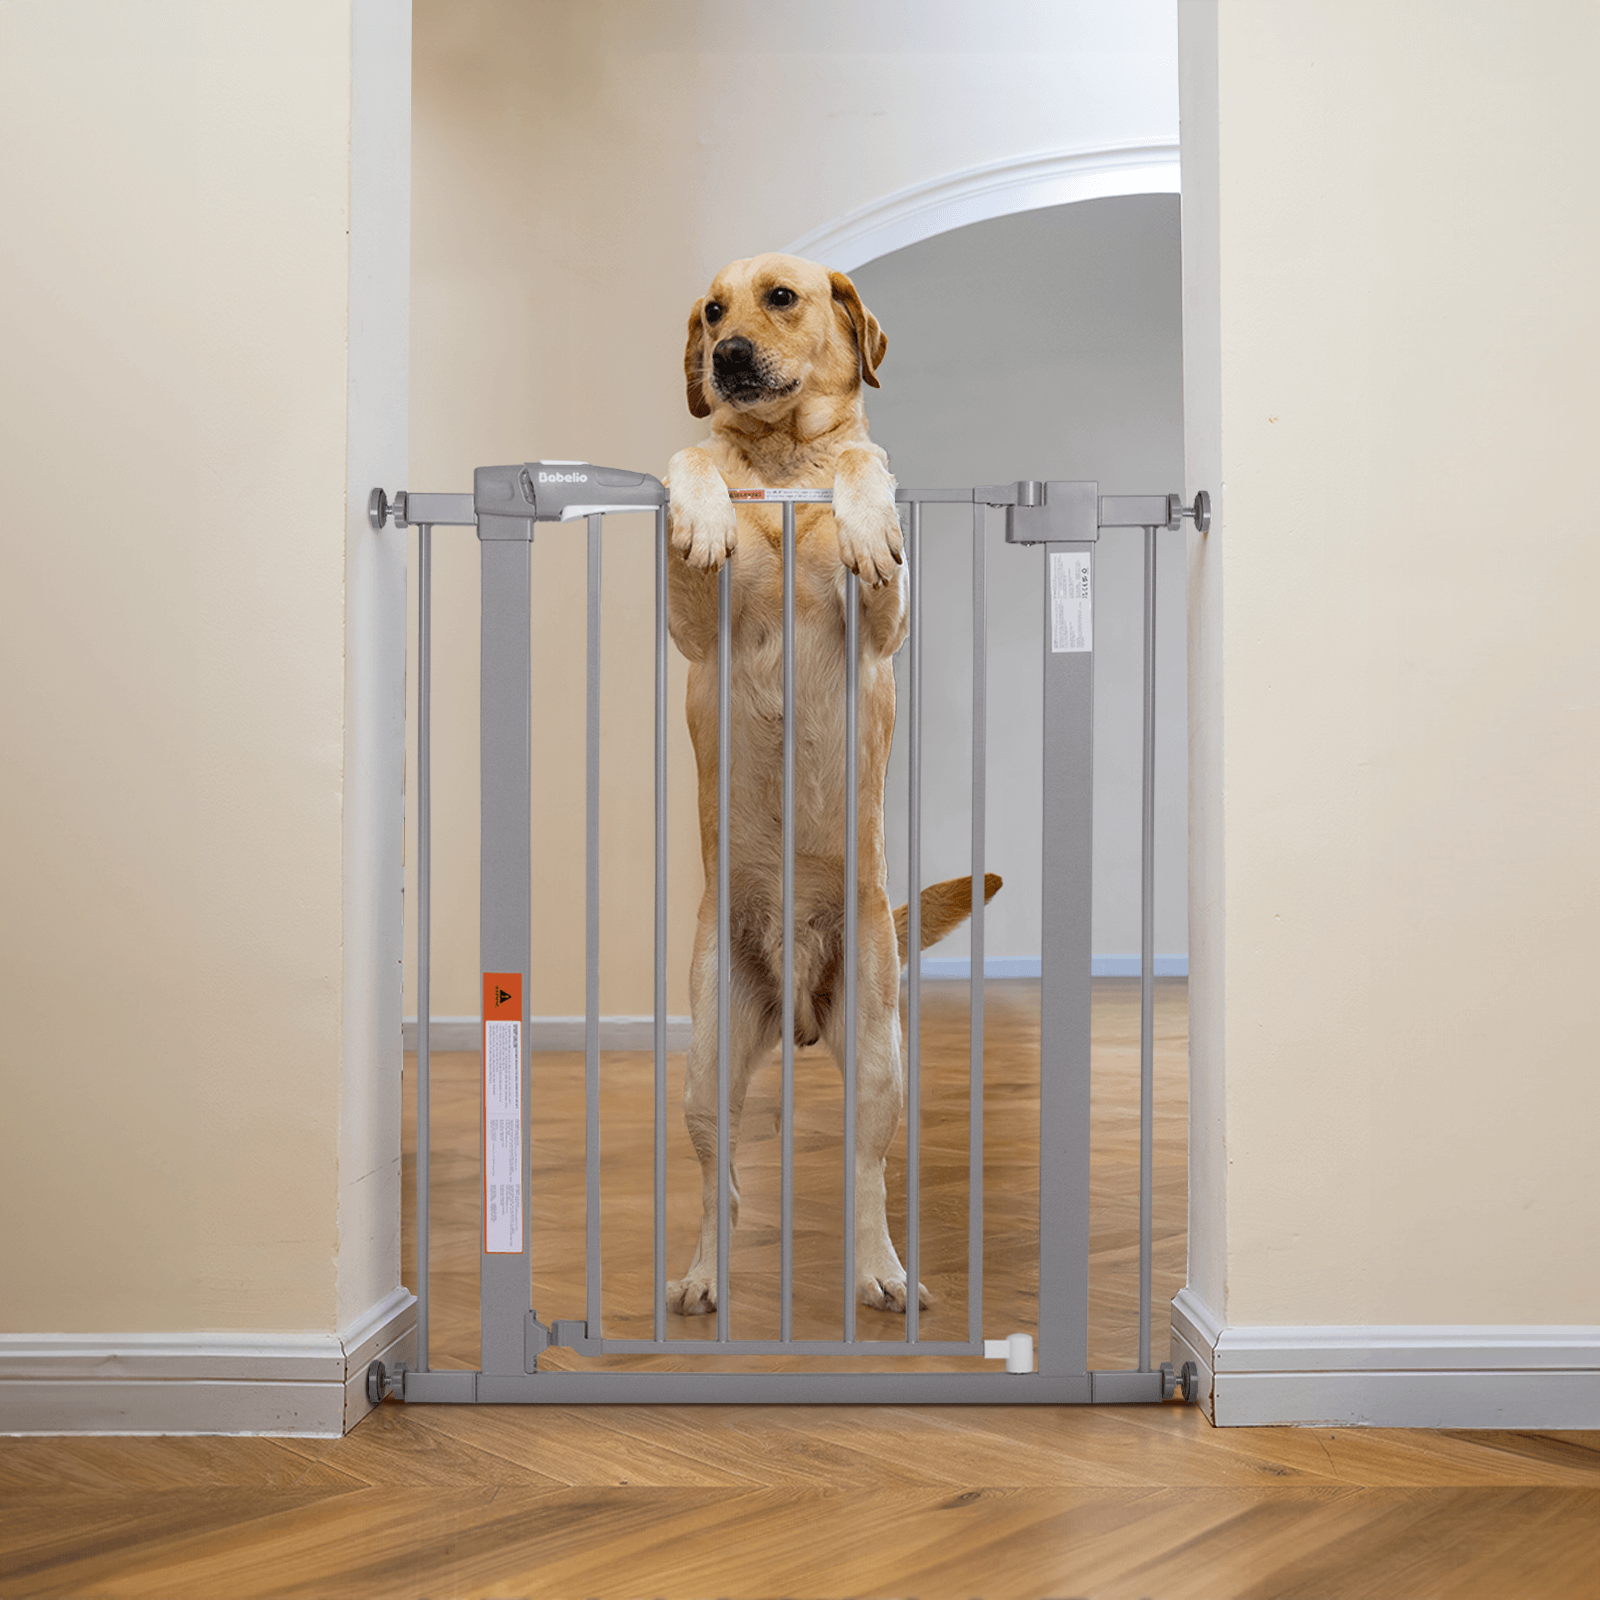 Babelio 36" High Adjustable Metal Baby/Pet Gate – 26-40" Wide, Auto-Close, Easy Install, Safe for Home Use